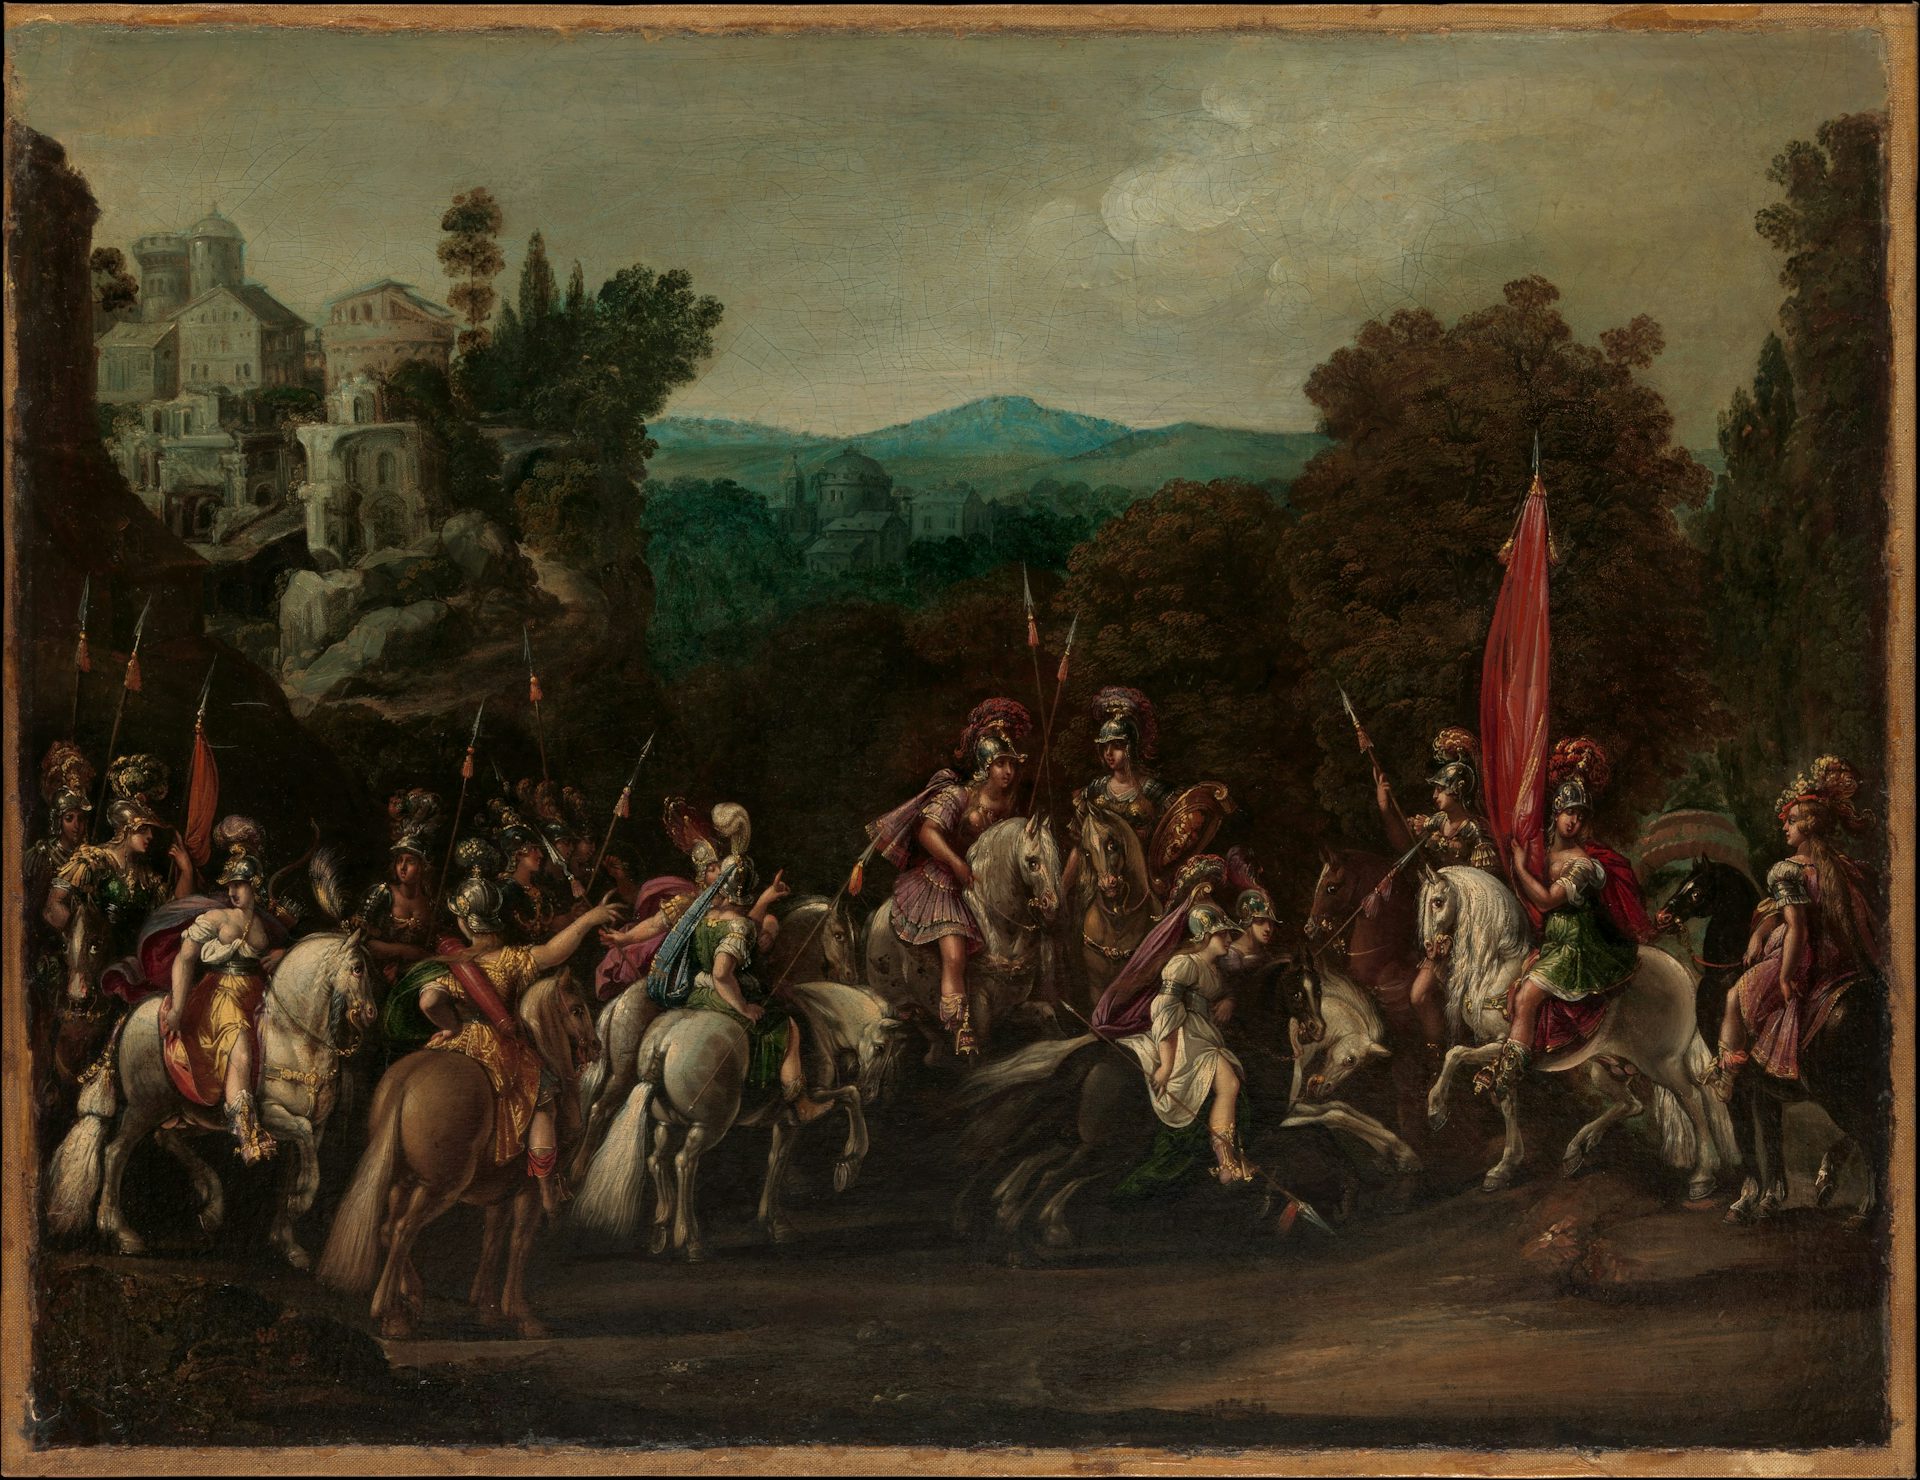 Departure of the Amazons by Claude Déruet